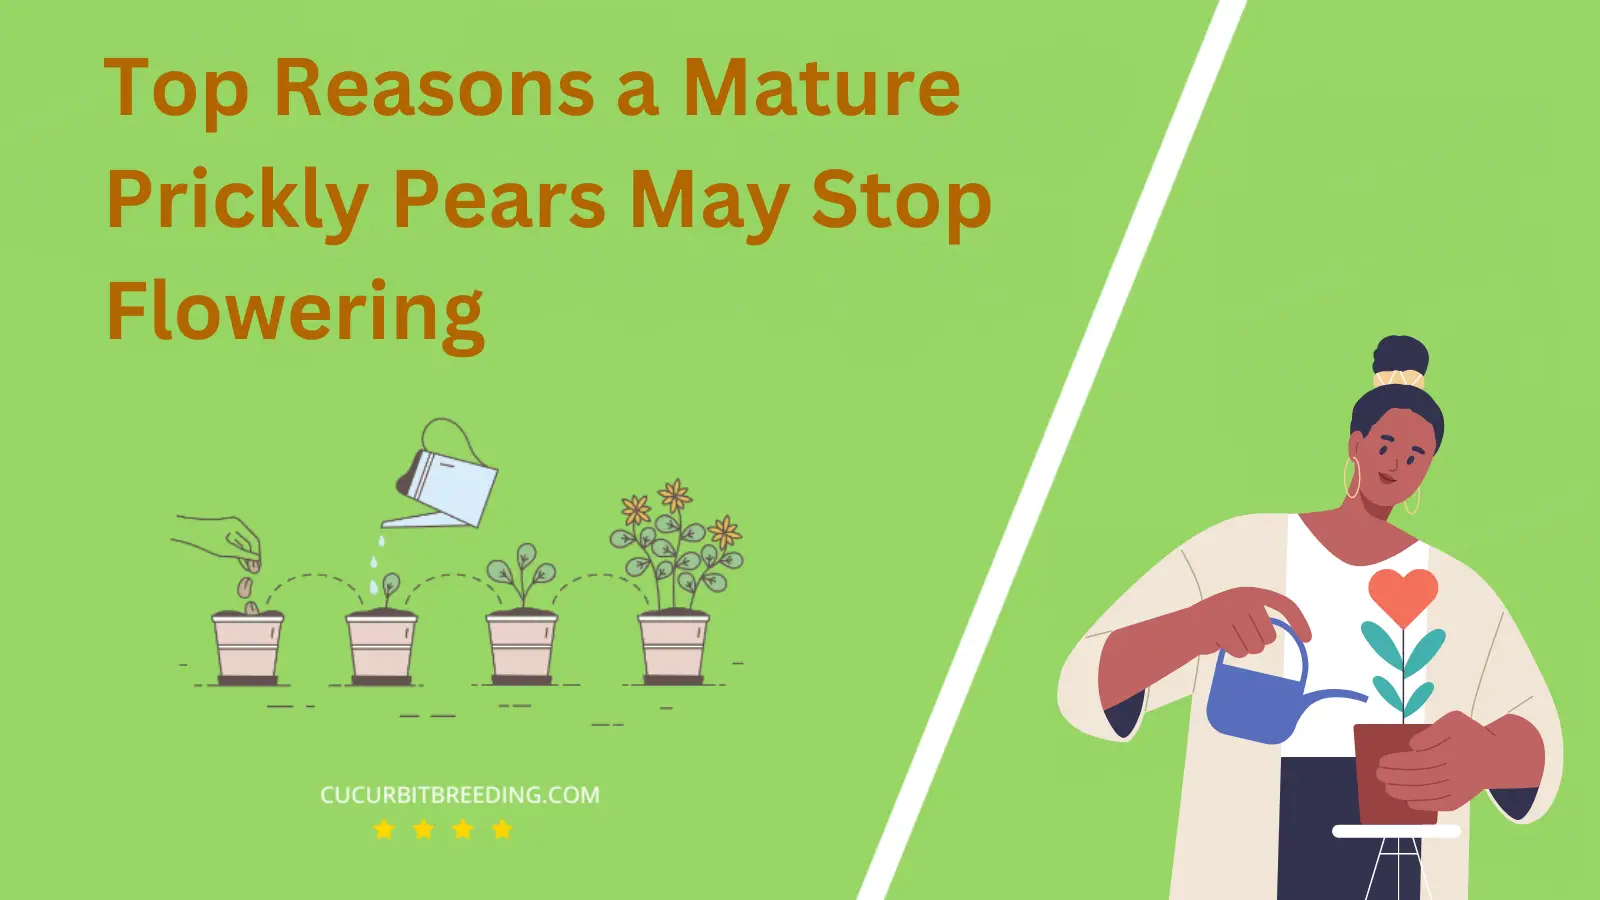 Top Reasons a Mature Prickly Pears May Stop Flowering